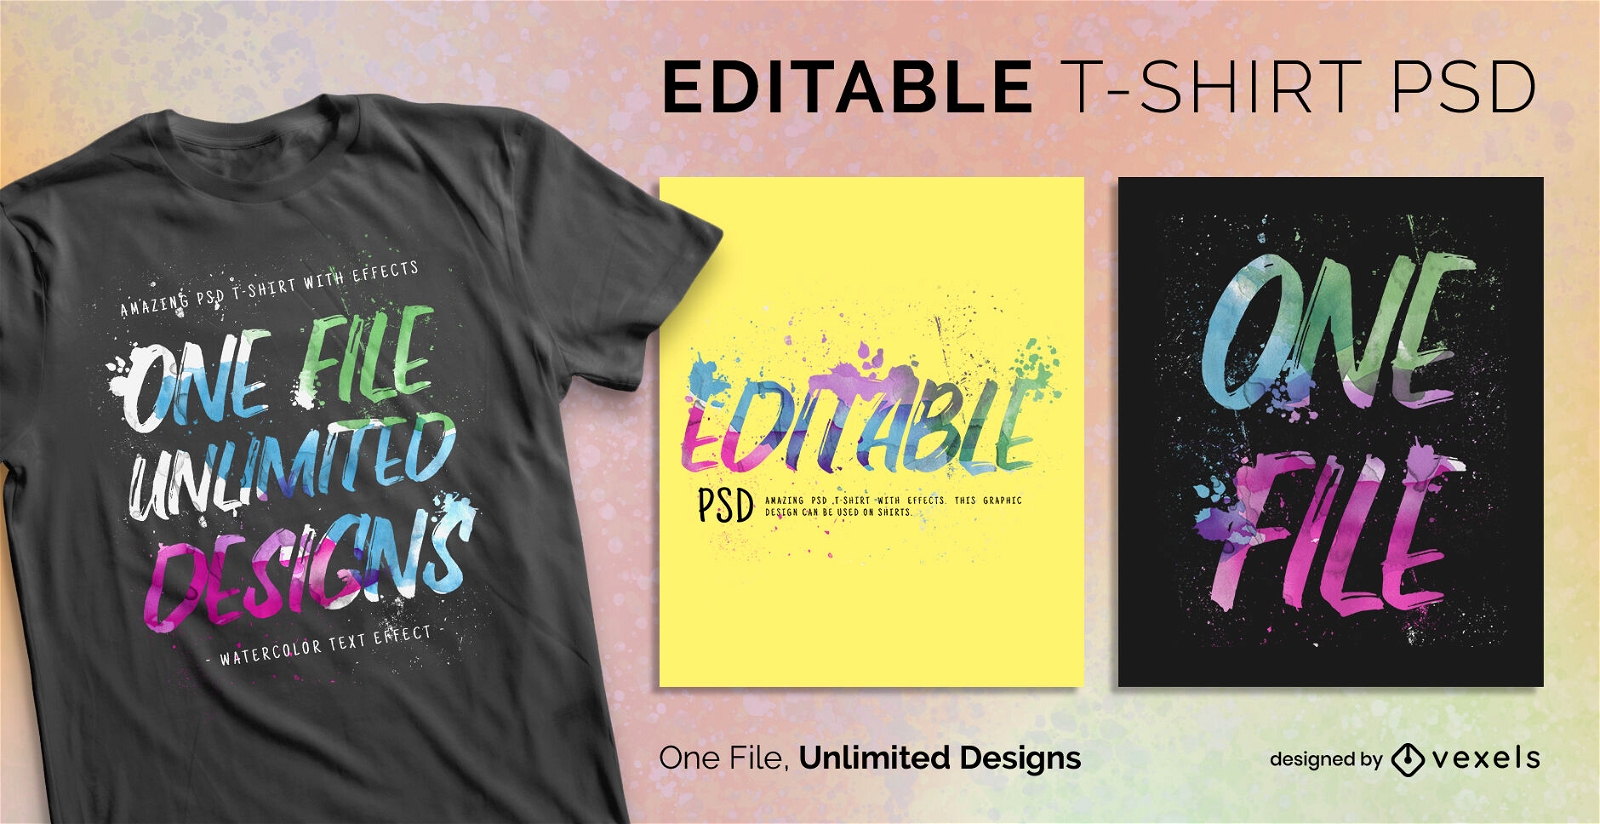 Watercolor texts scalable t-shirt psd